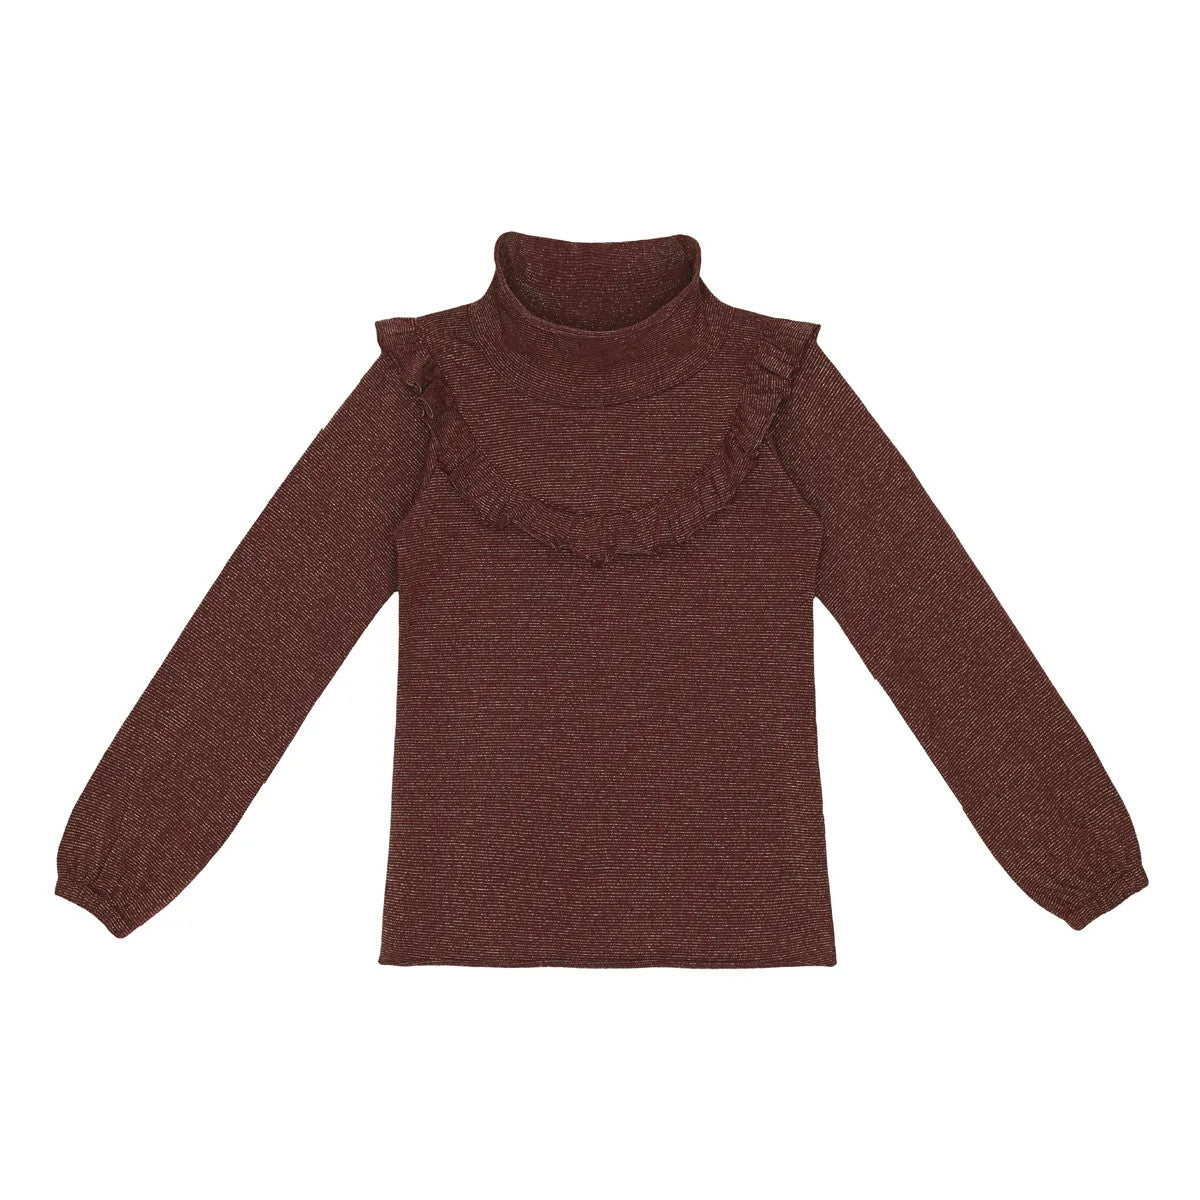 Little Hedonist girly organic cotton top for fancy occasions. In a dark wine tint.